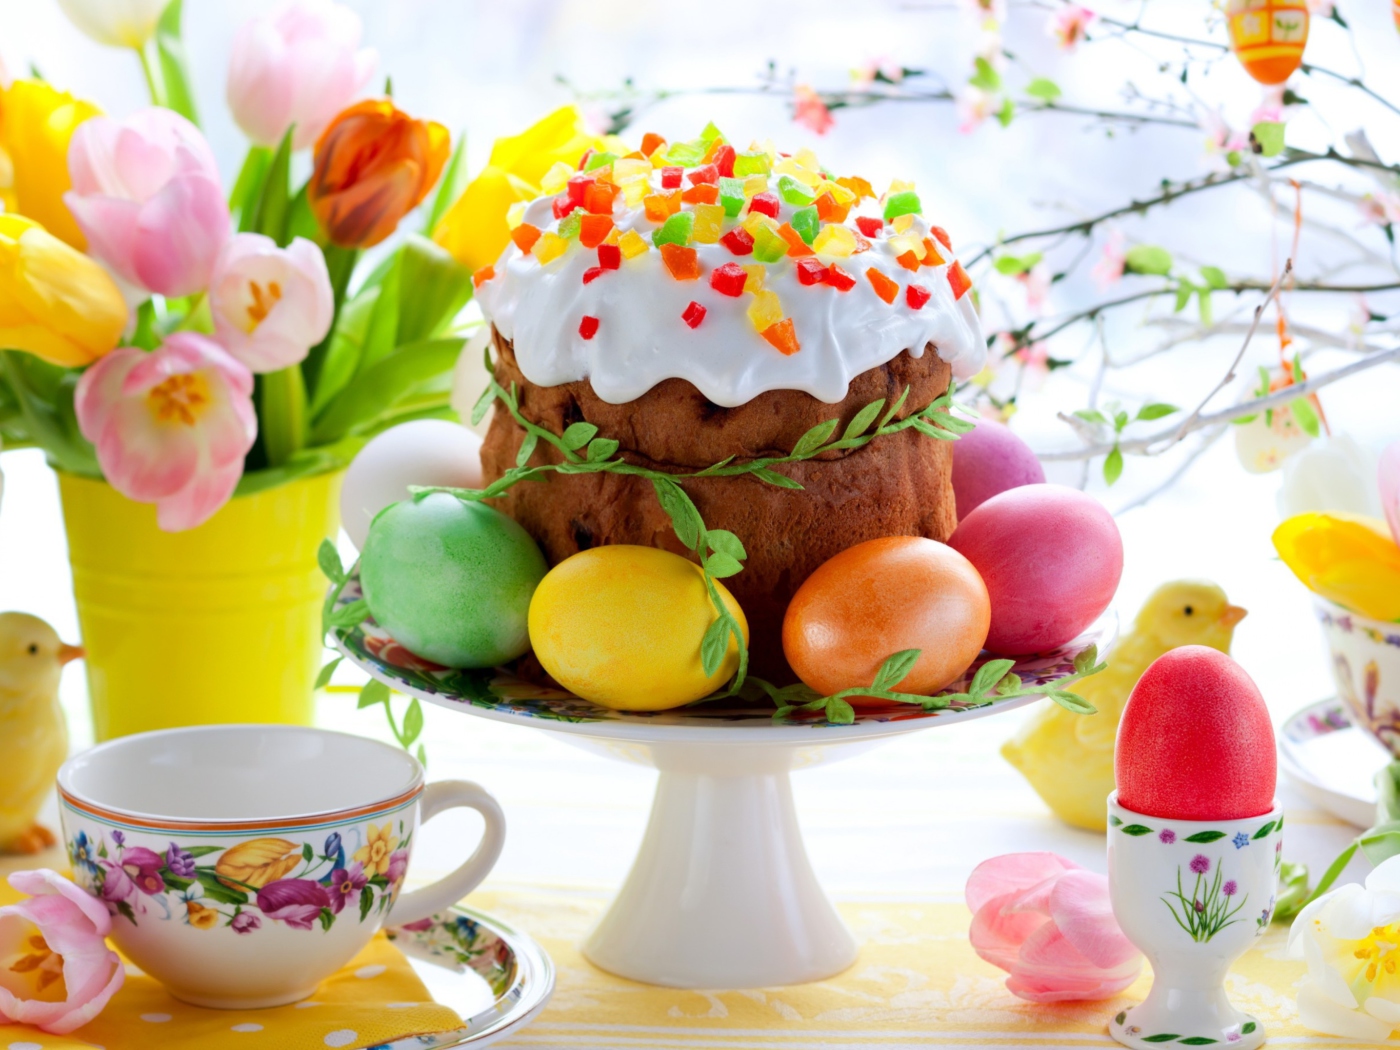 Easter Cake And Eggs wallpaper 1400x1050